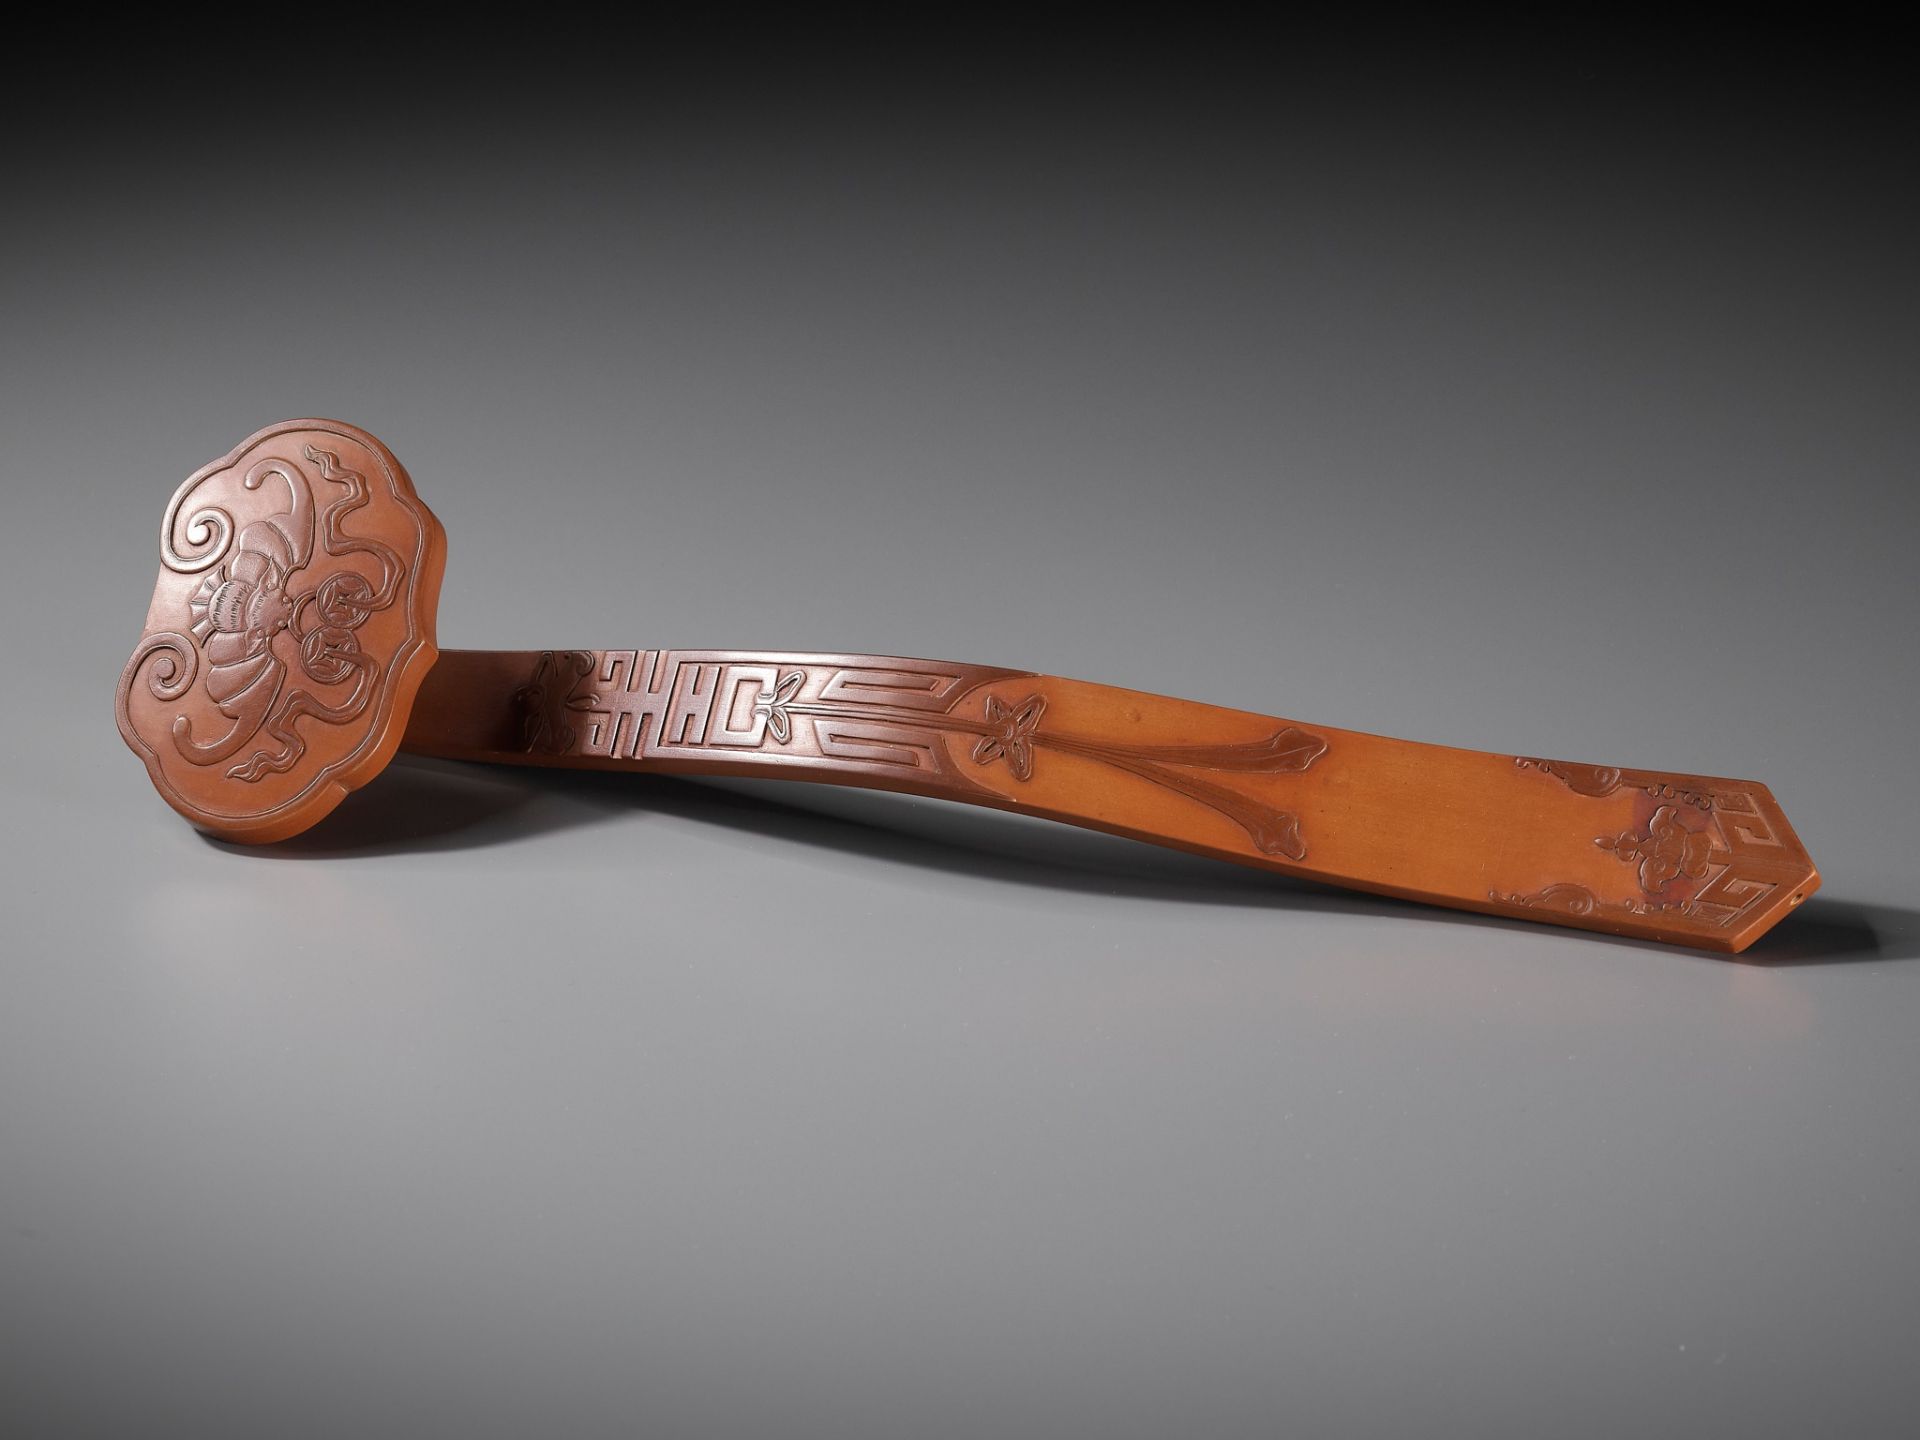 A RARE BAMBOO-VENEER RUYI SCEPTRE, QIANLONG PERIOD, IMPERIALLY INSCRIBED WITH A POEM